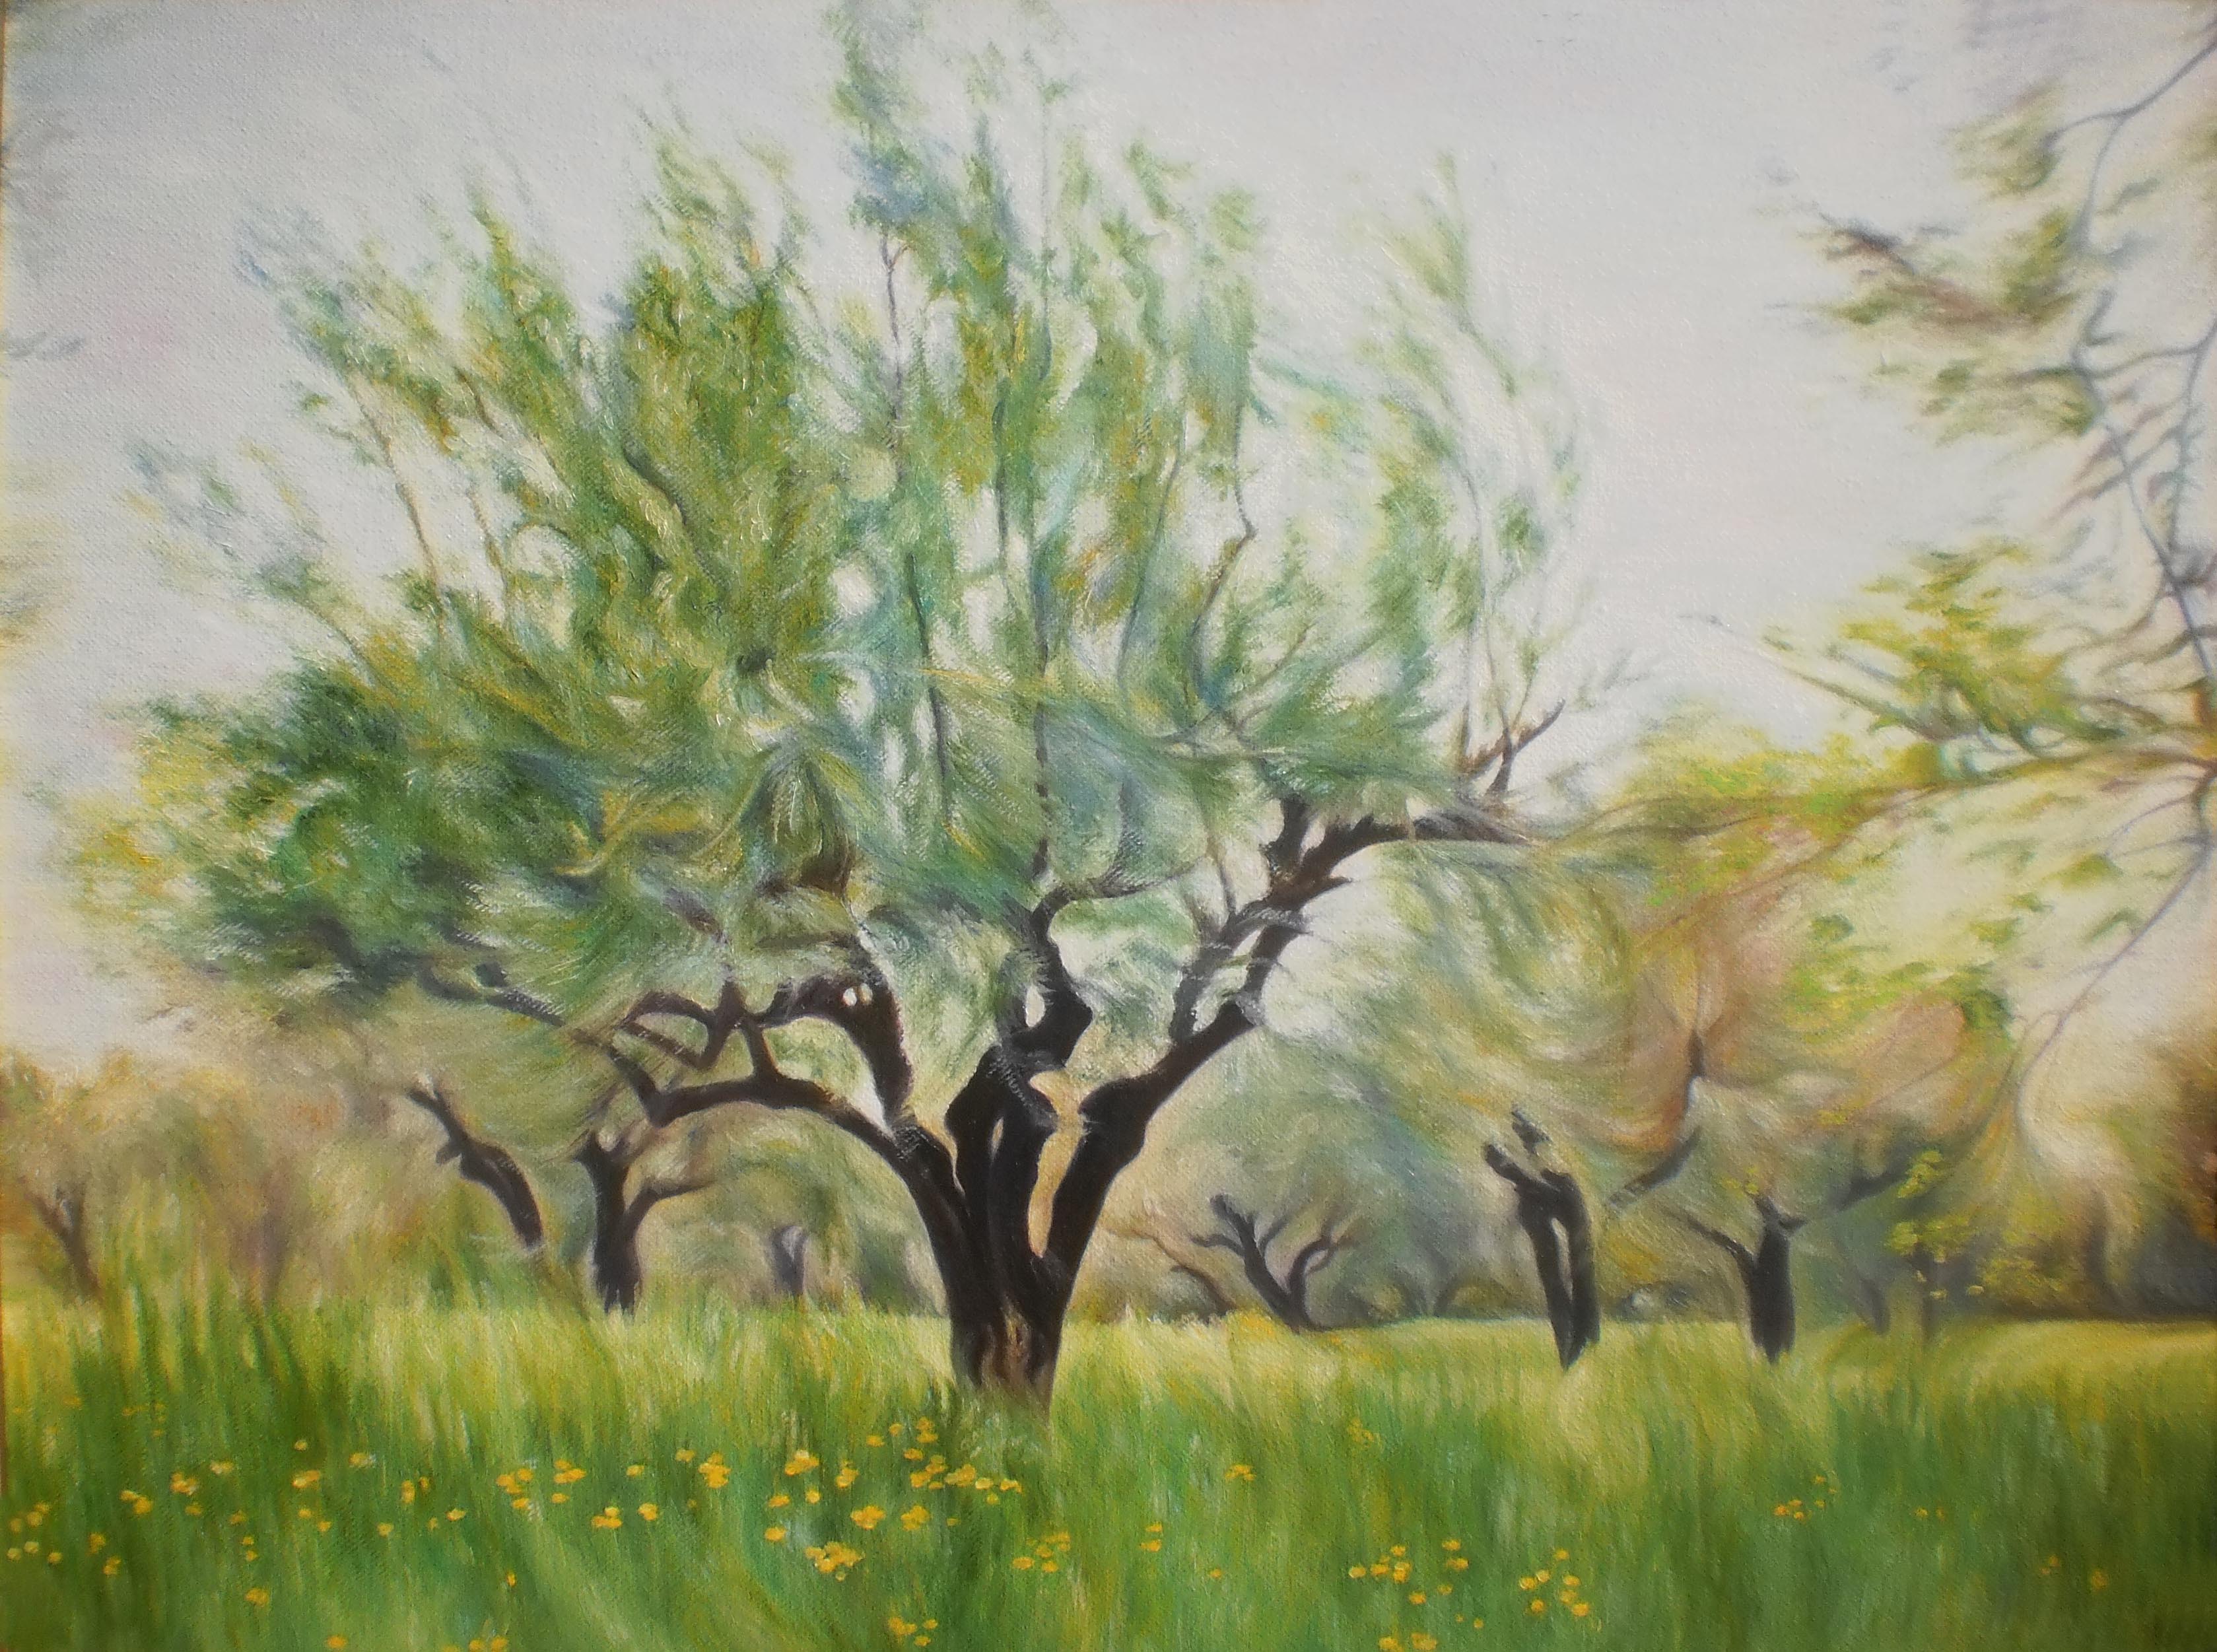 -Olive trees, windy- Dimensions: 50cm x 38cm